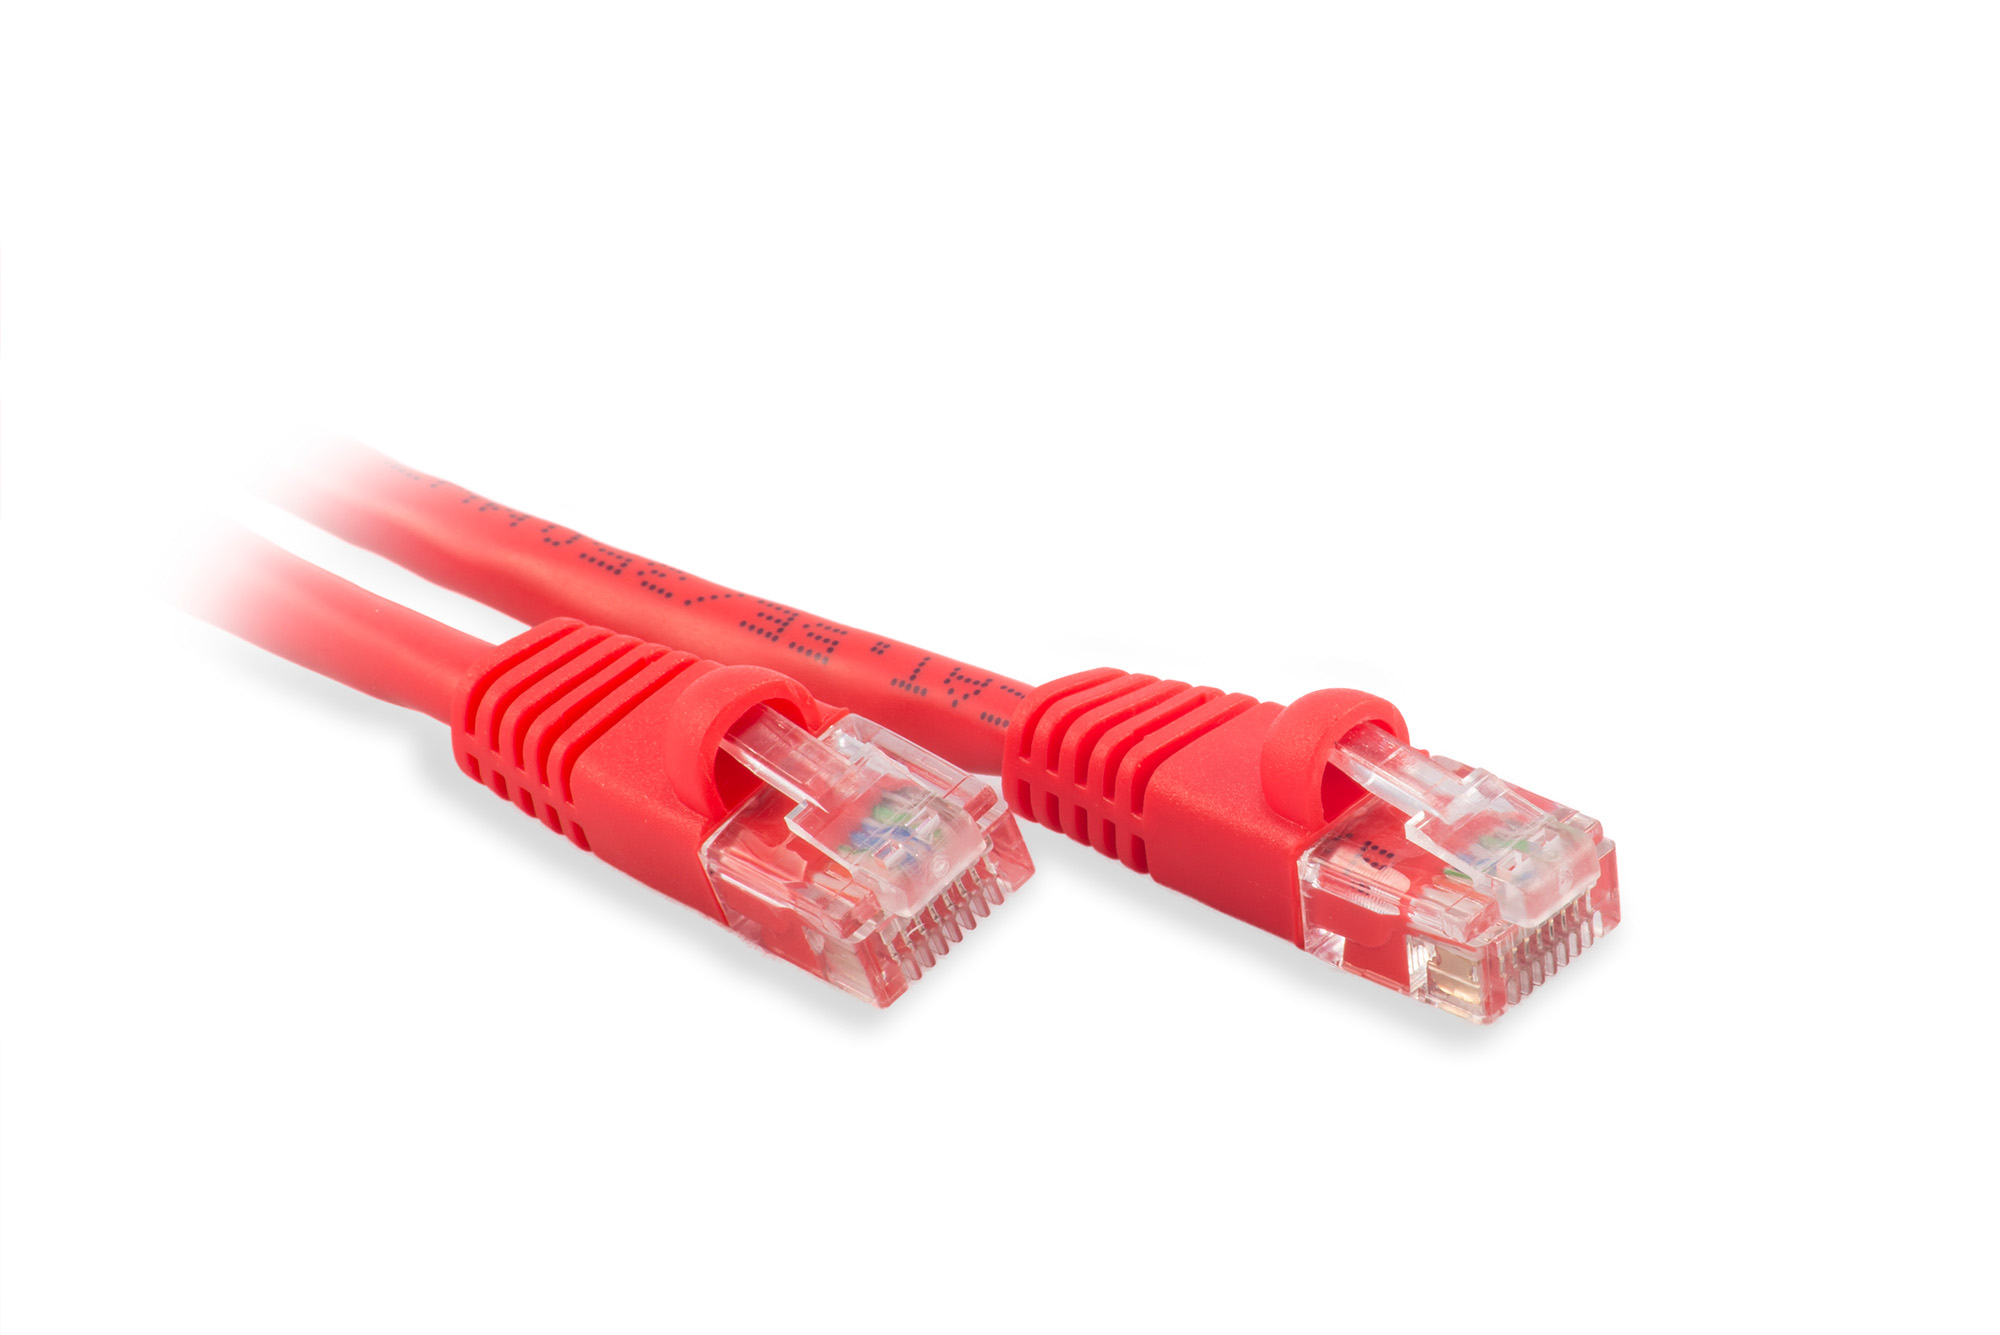 12ft Cat6 Ethernet Patch Cable - Red Color - Snagless Boot